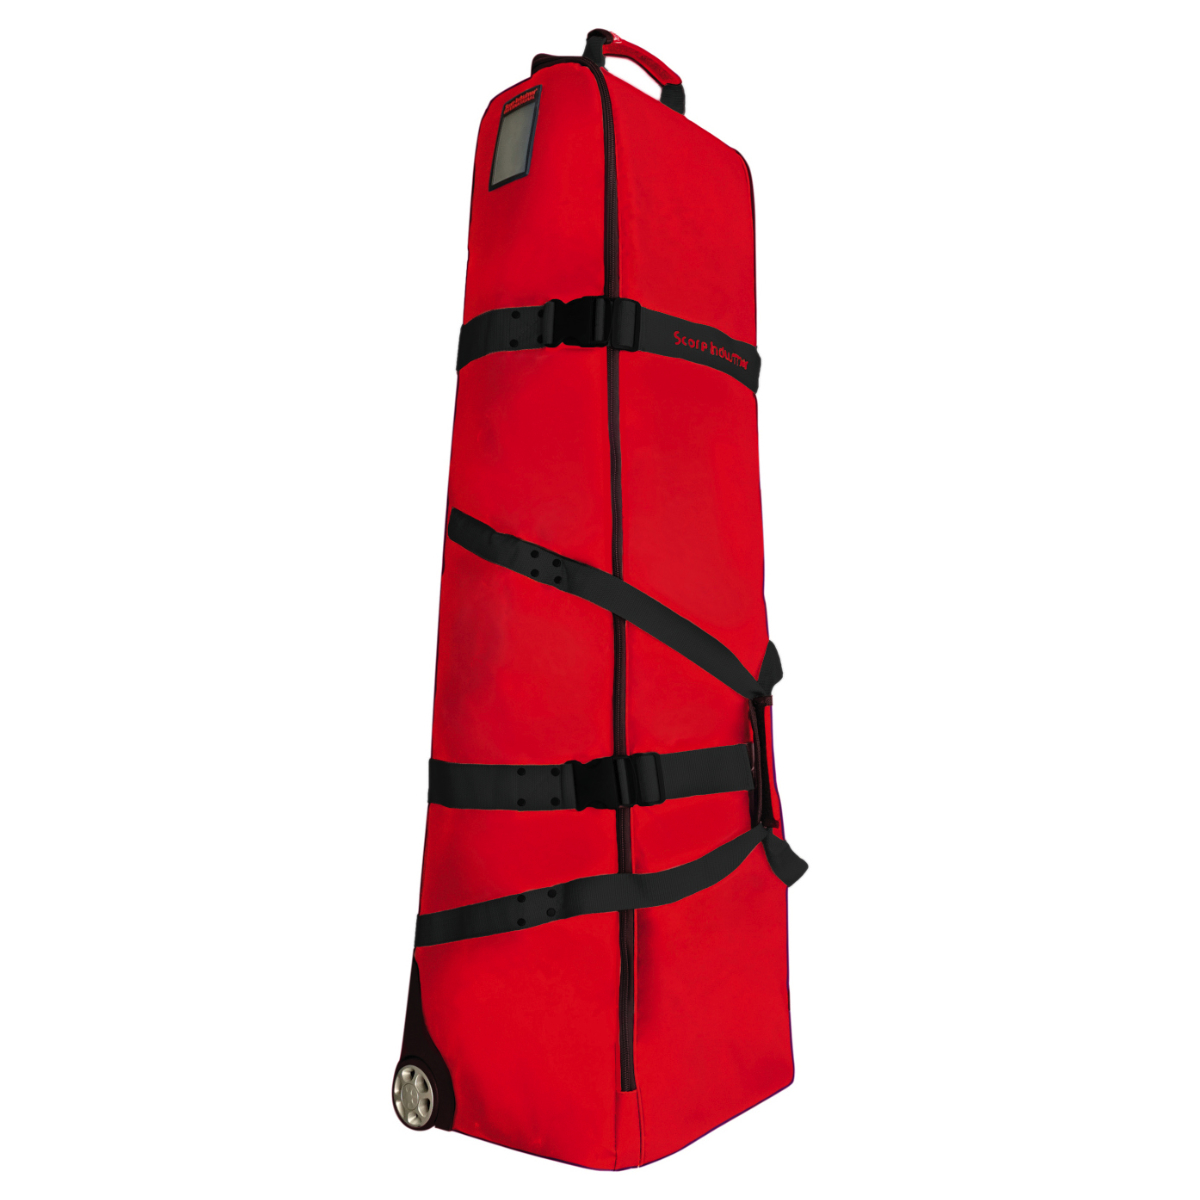 Score Industries PT 744 Red Travelcover